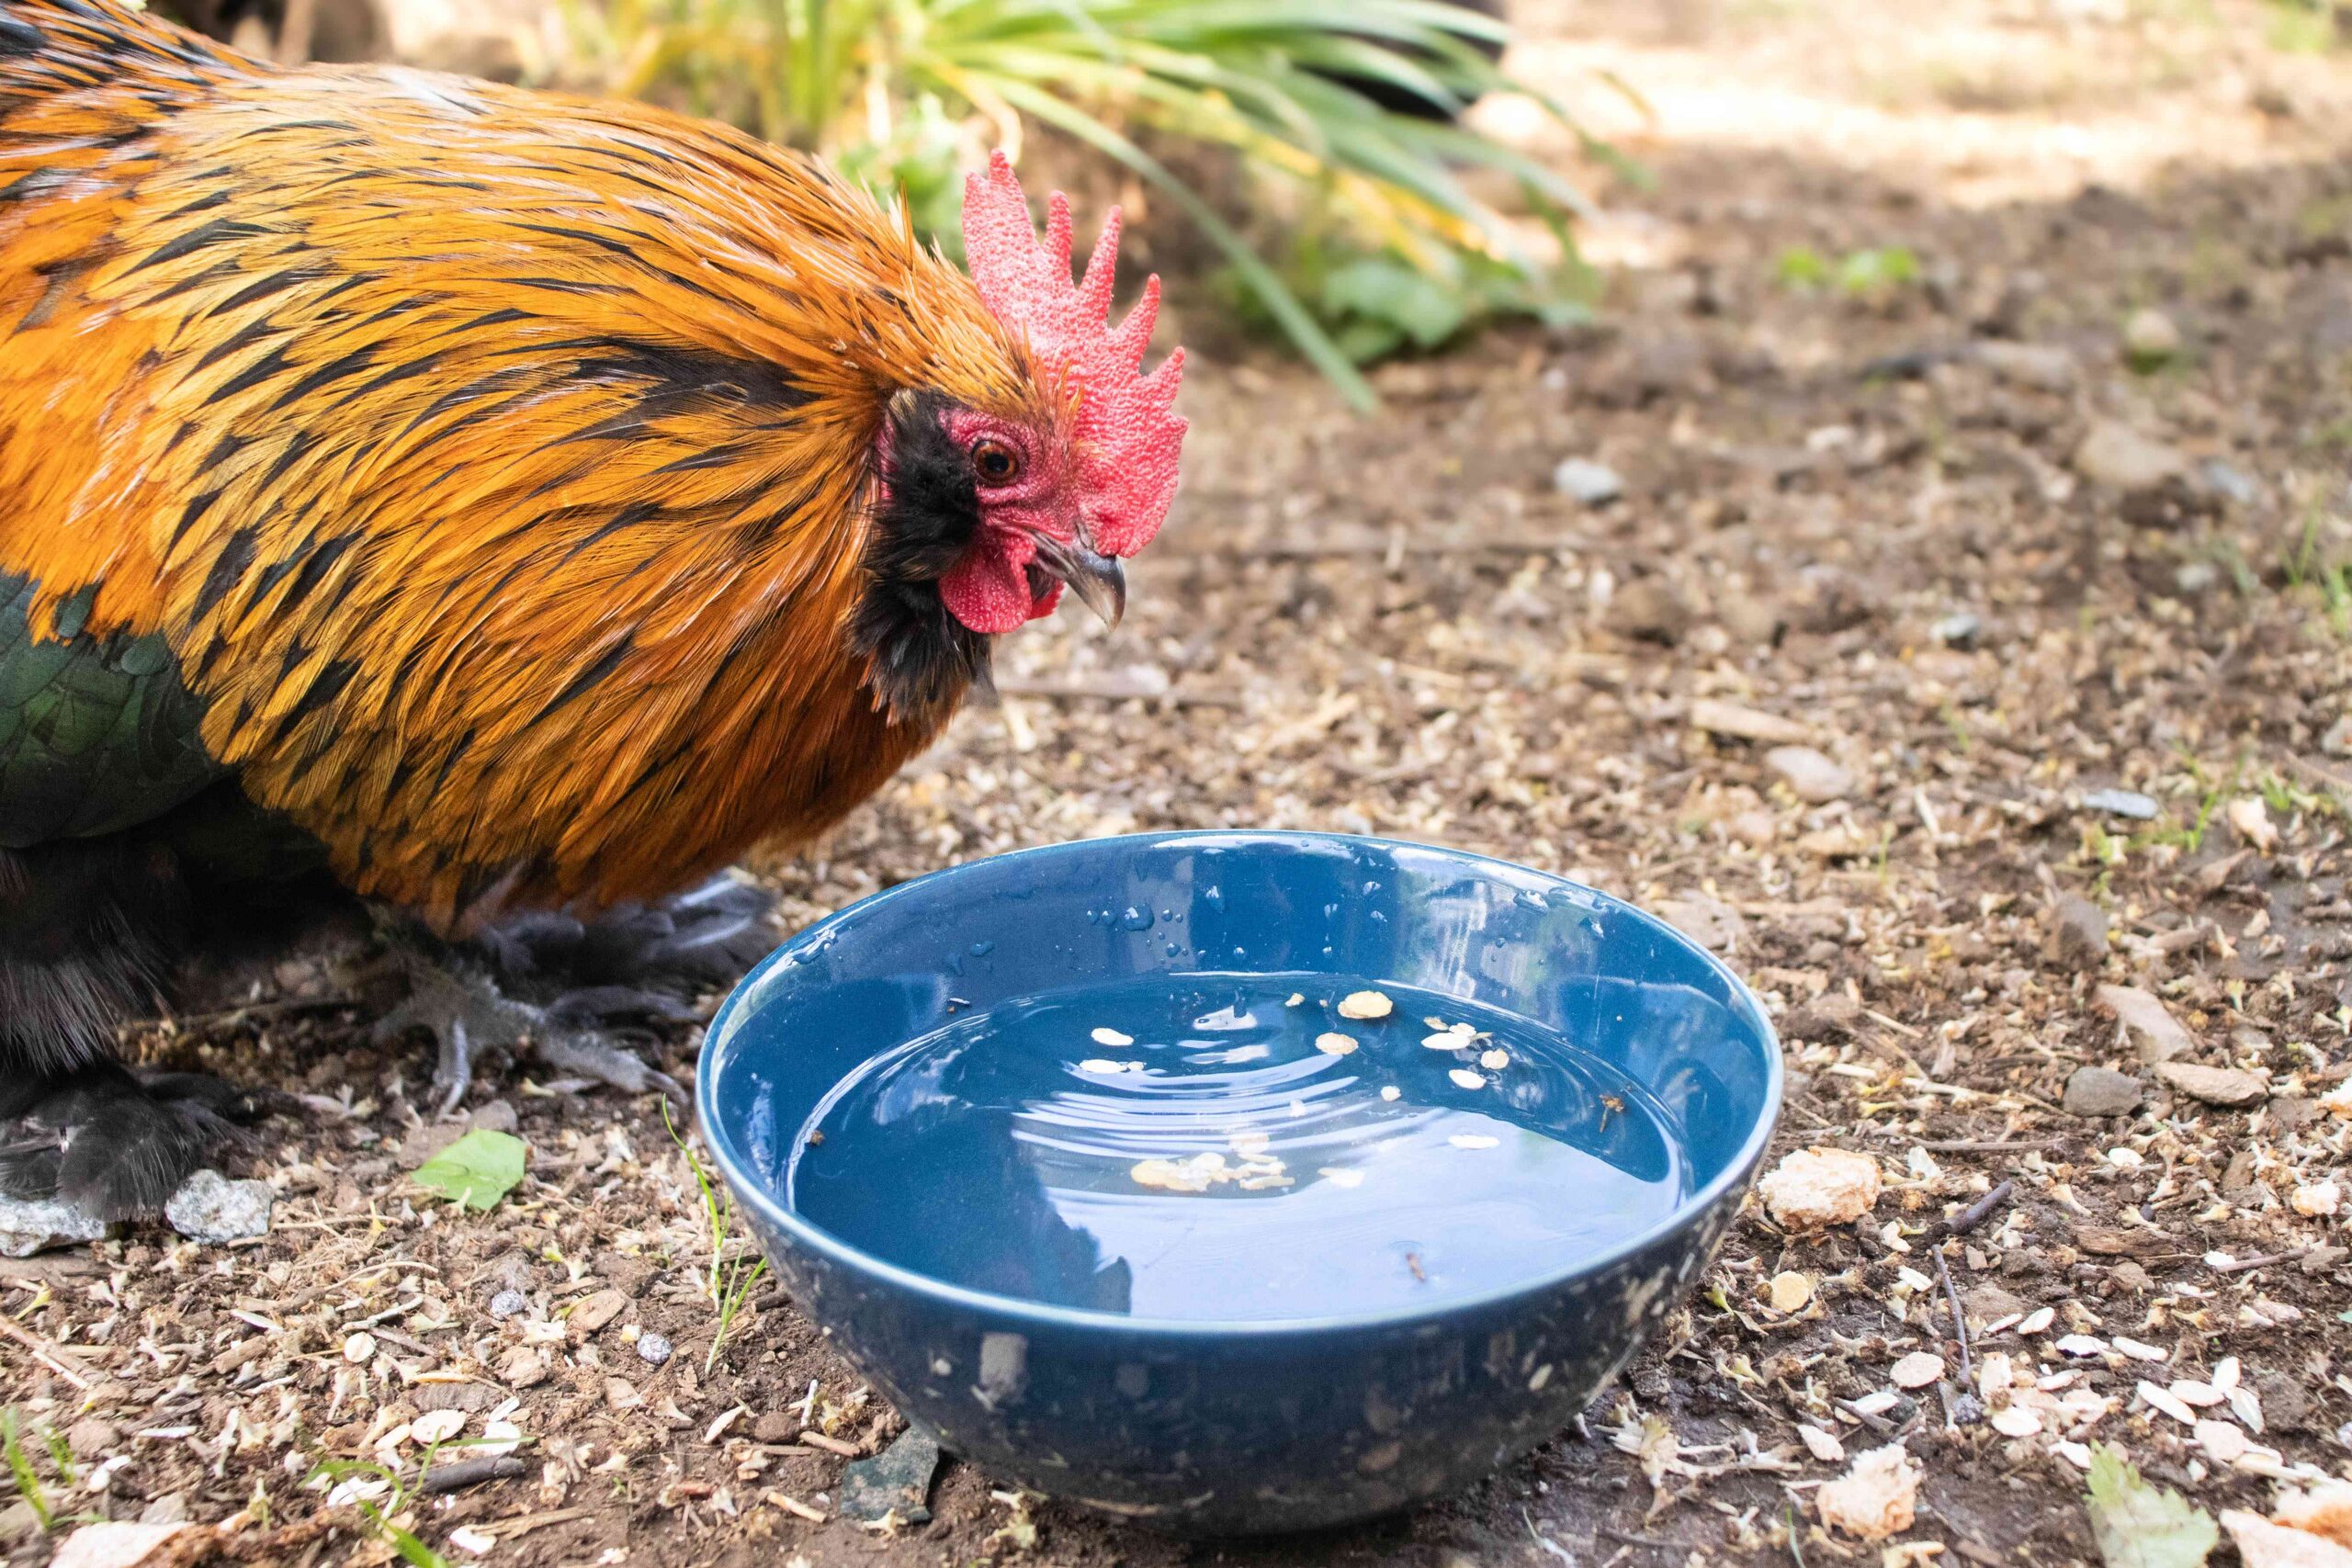 A rooster drinking from a bowl of water